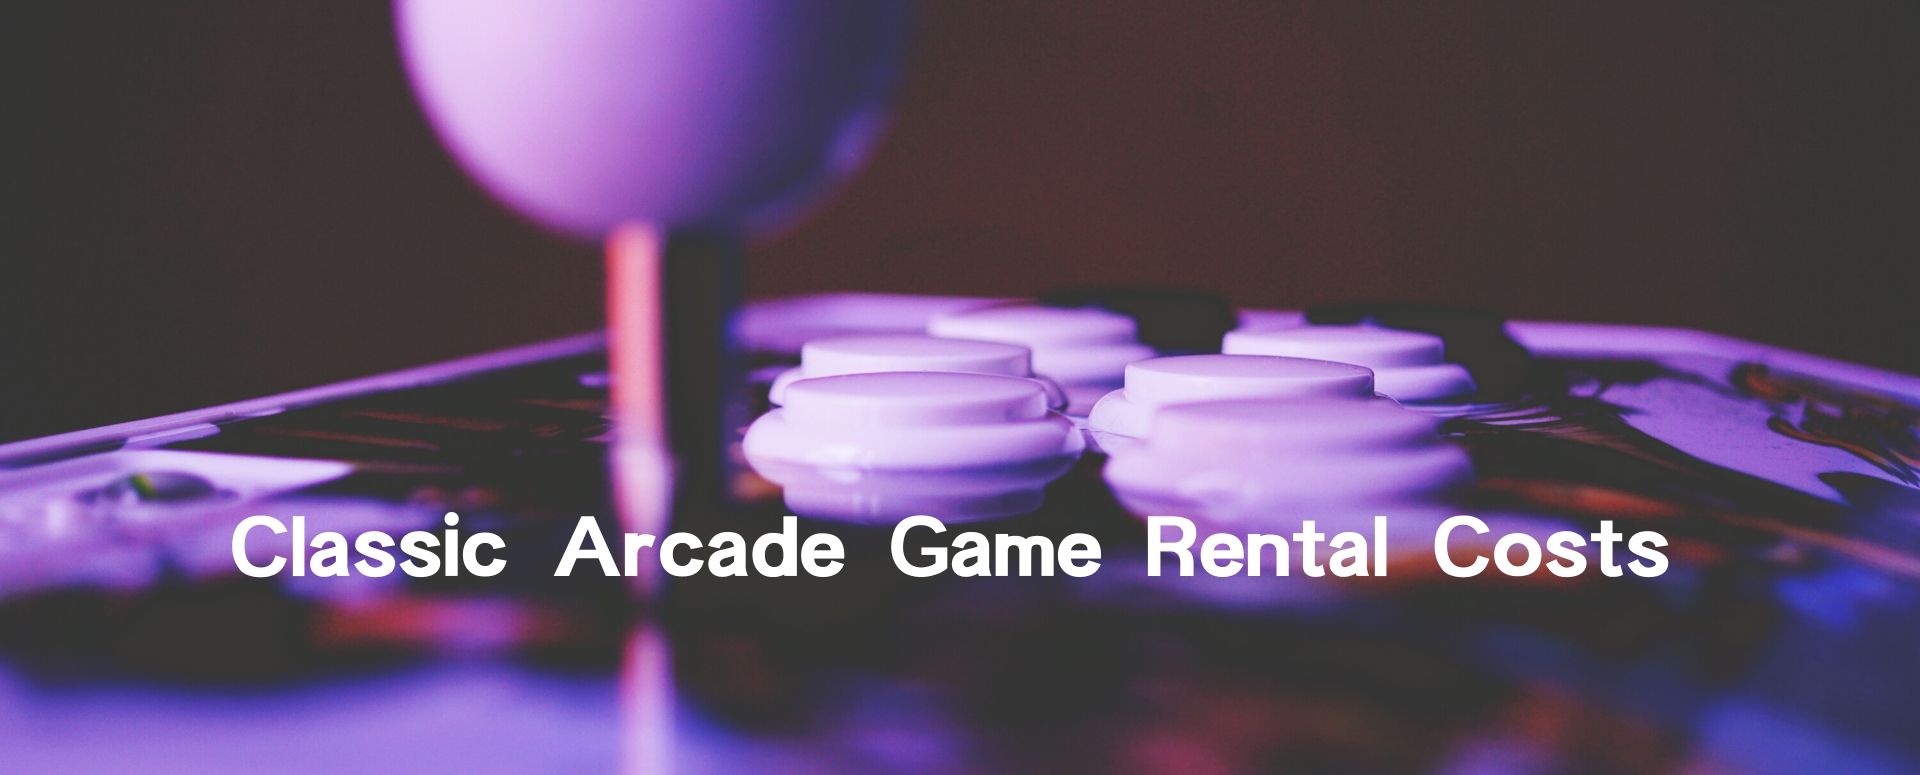 Classic Arcade Game Rental Costs title